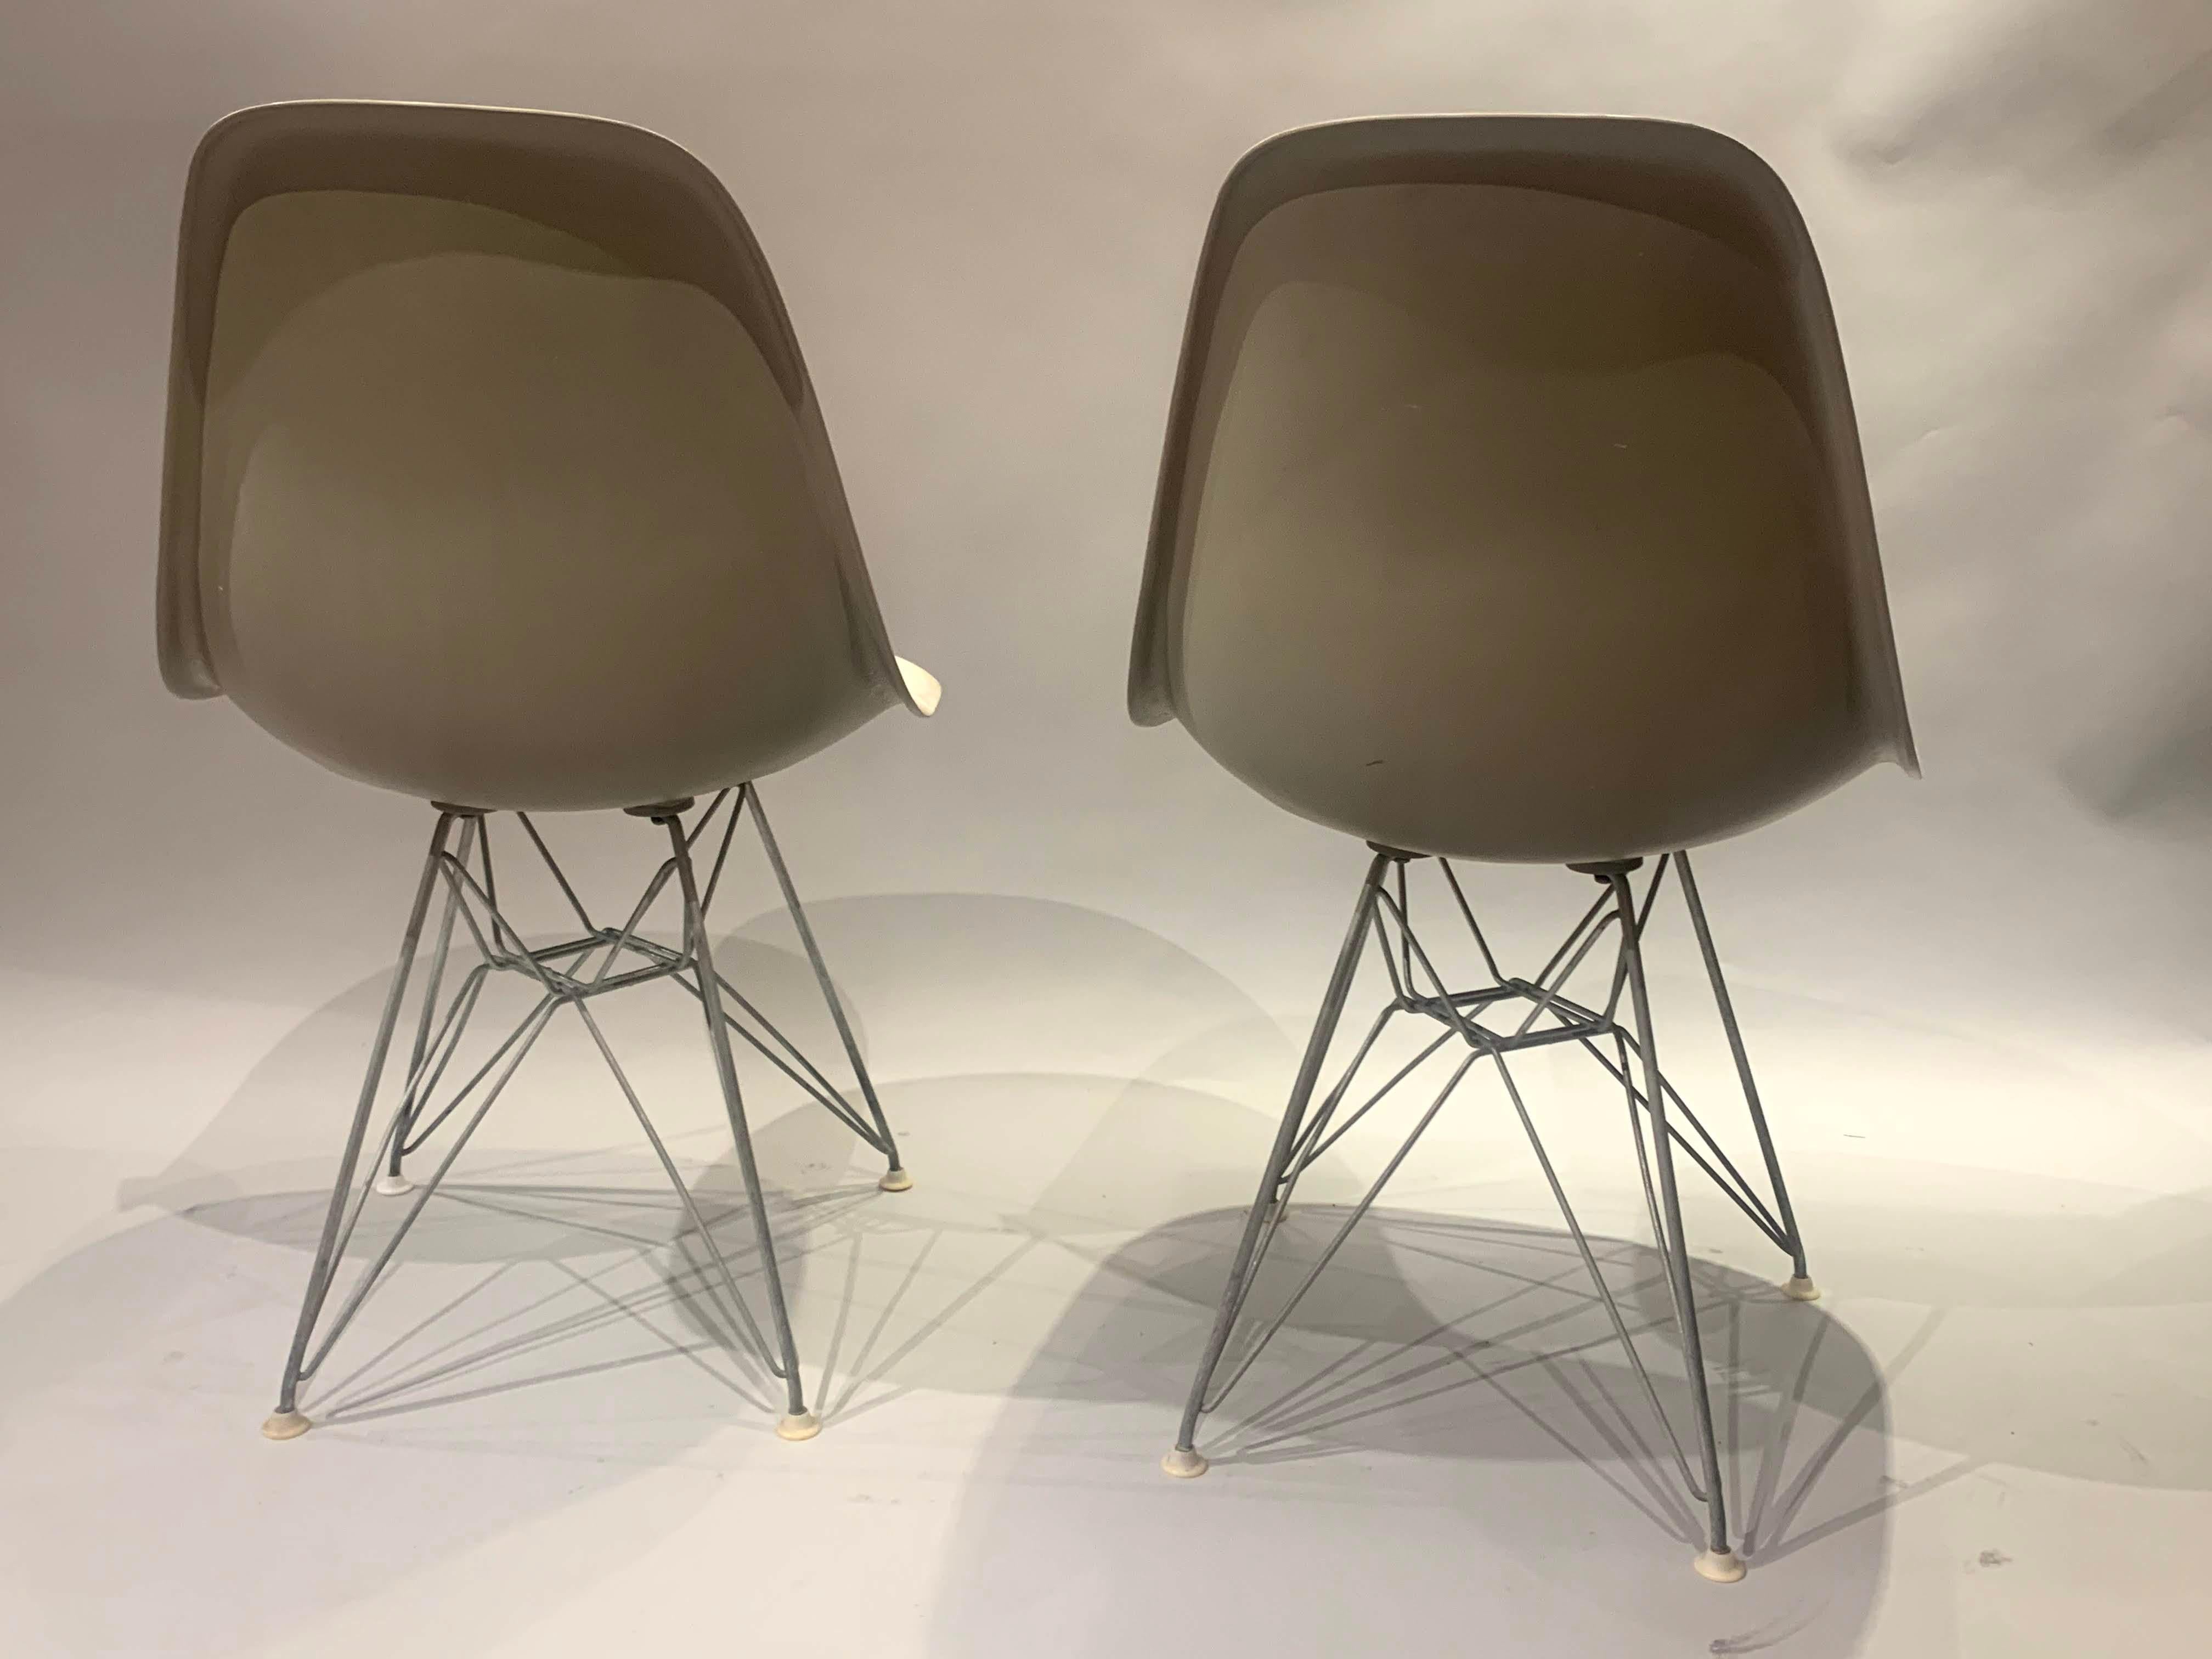 American Pair of Midcentury Eames Fiberglass Eiffel Tower Shell Chairs for Herman Miller